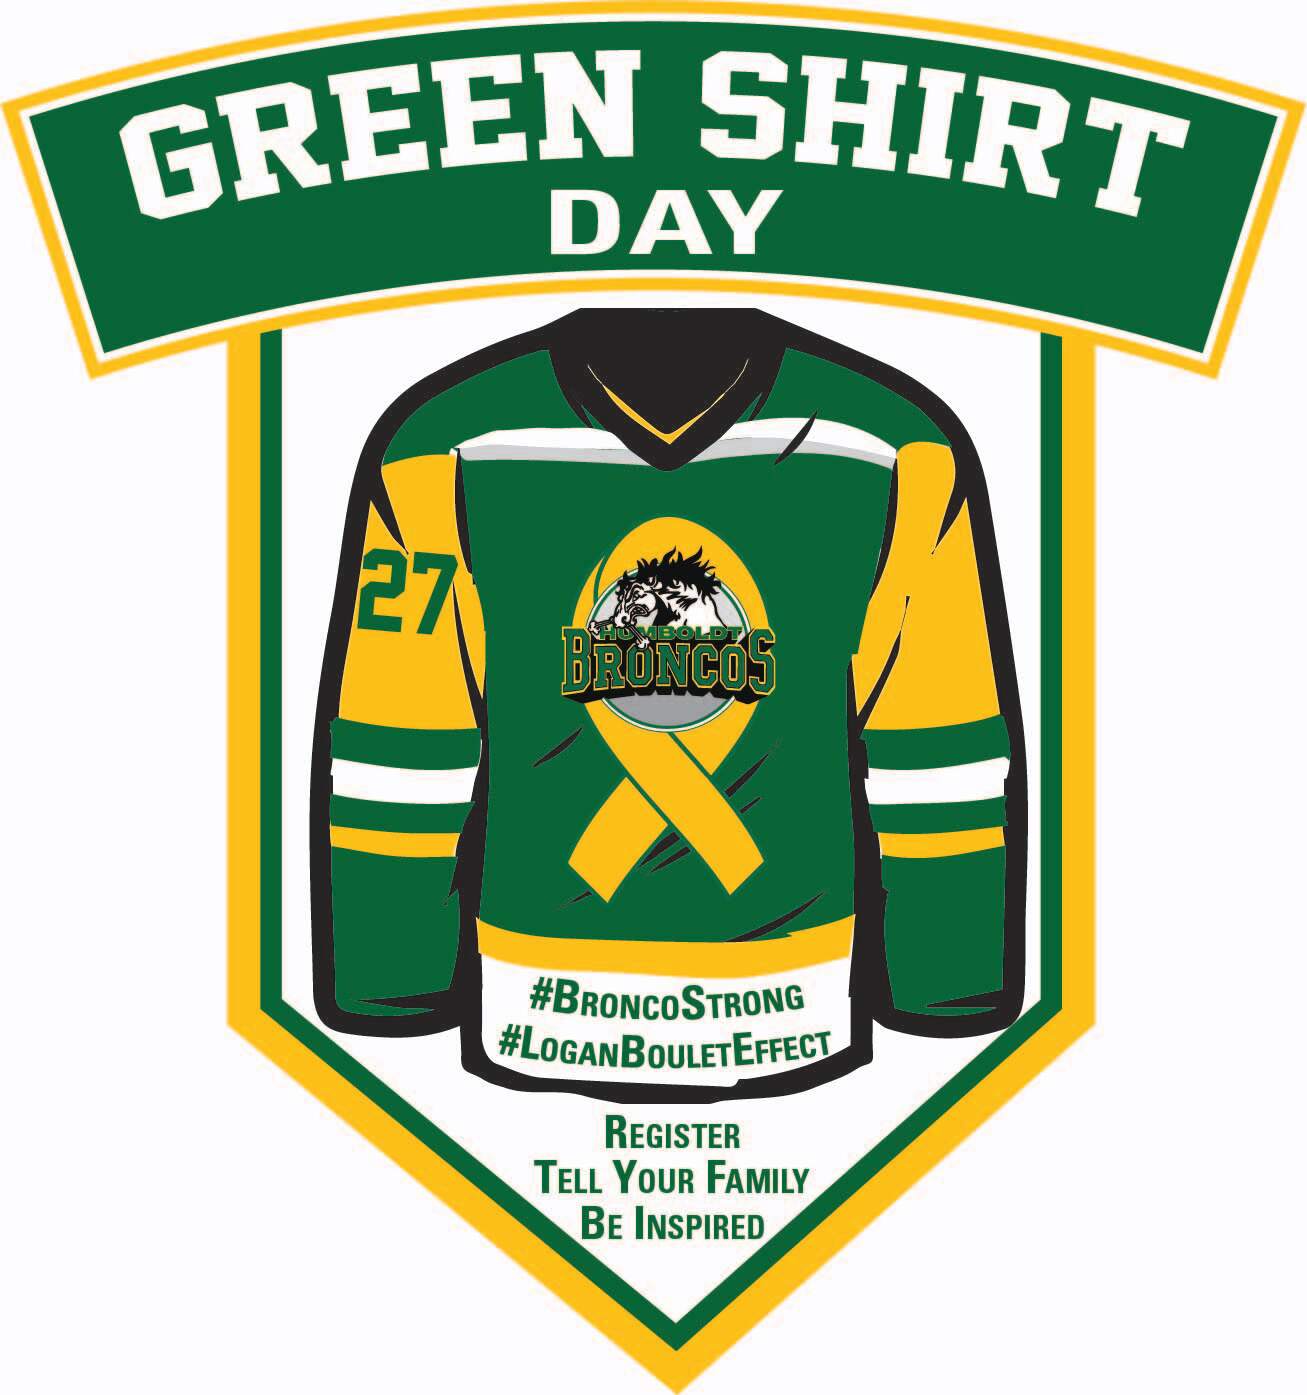 GREEN SHIRT DAY - Events - K94.5